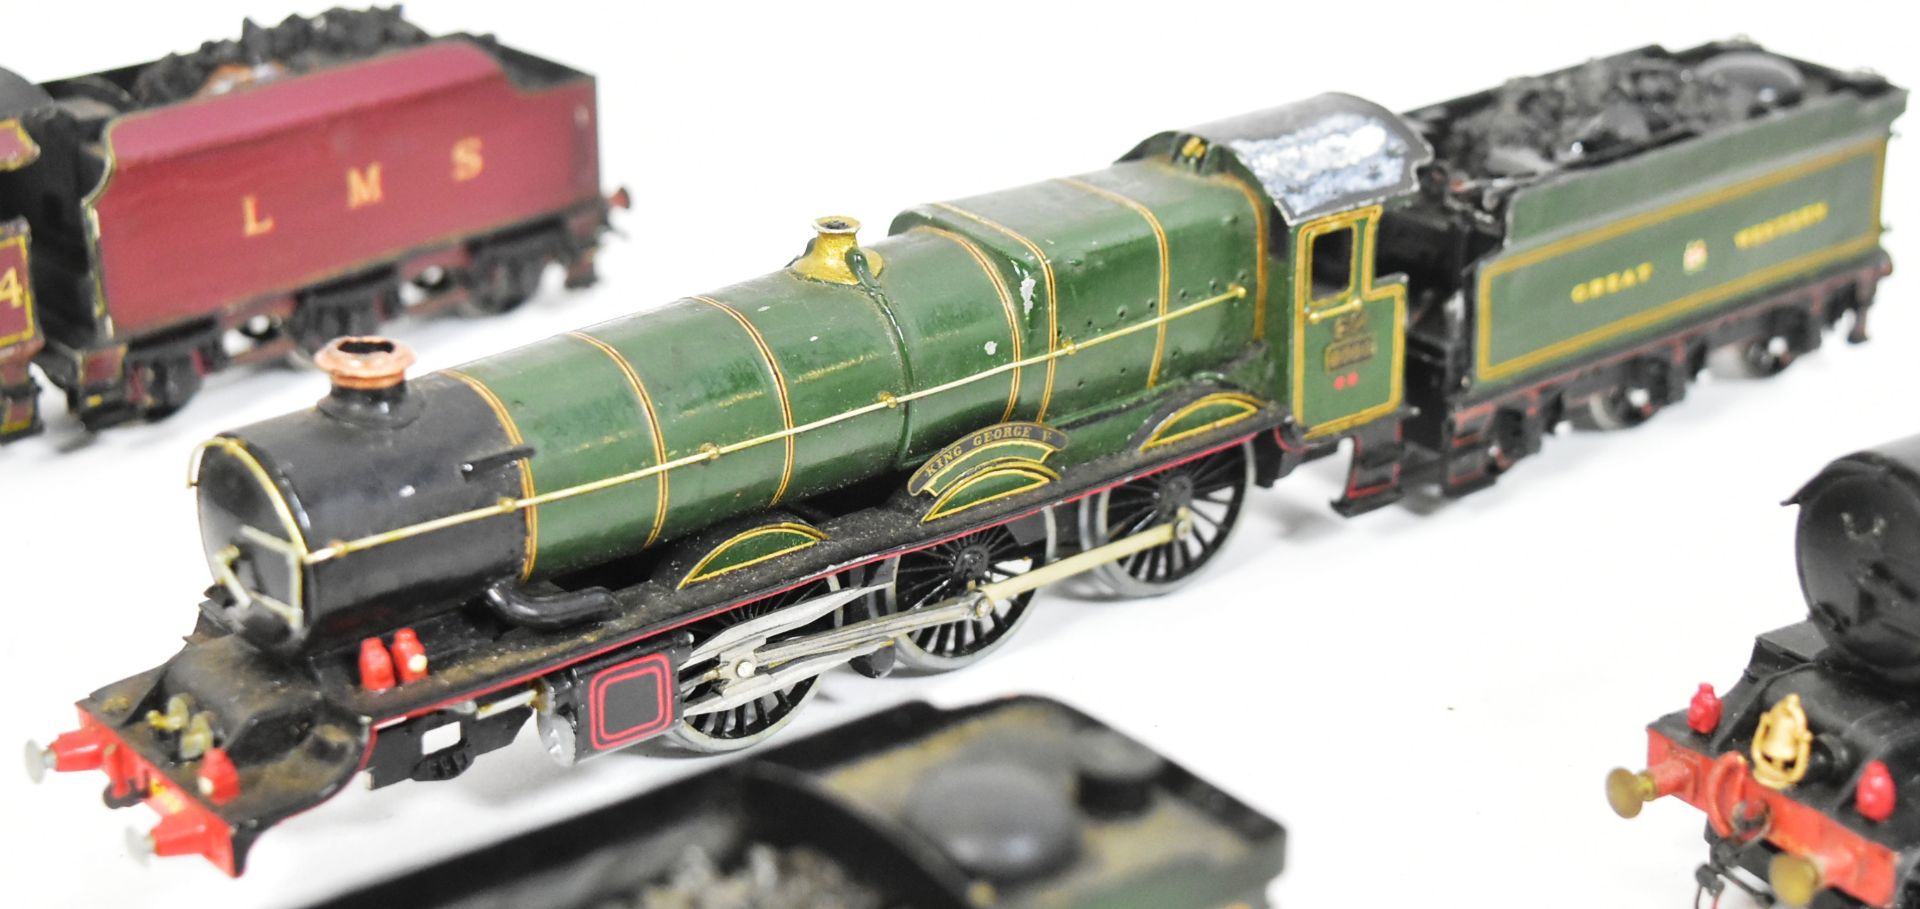 MODEL RAILWAY - COLLECTION OF KIT BUILT LOCOMOTIVES - Image 3 of 6